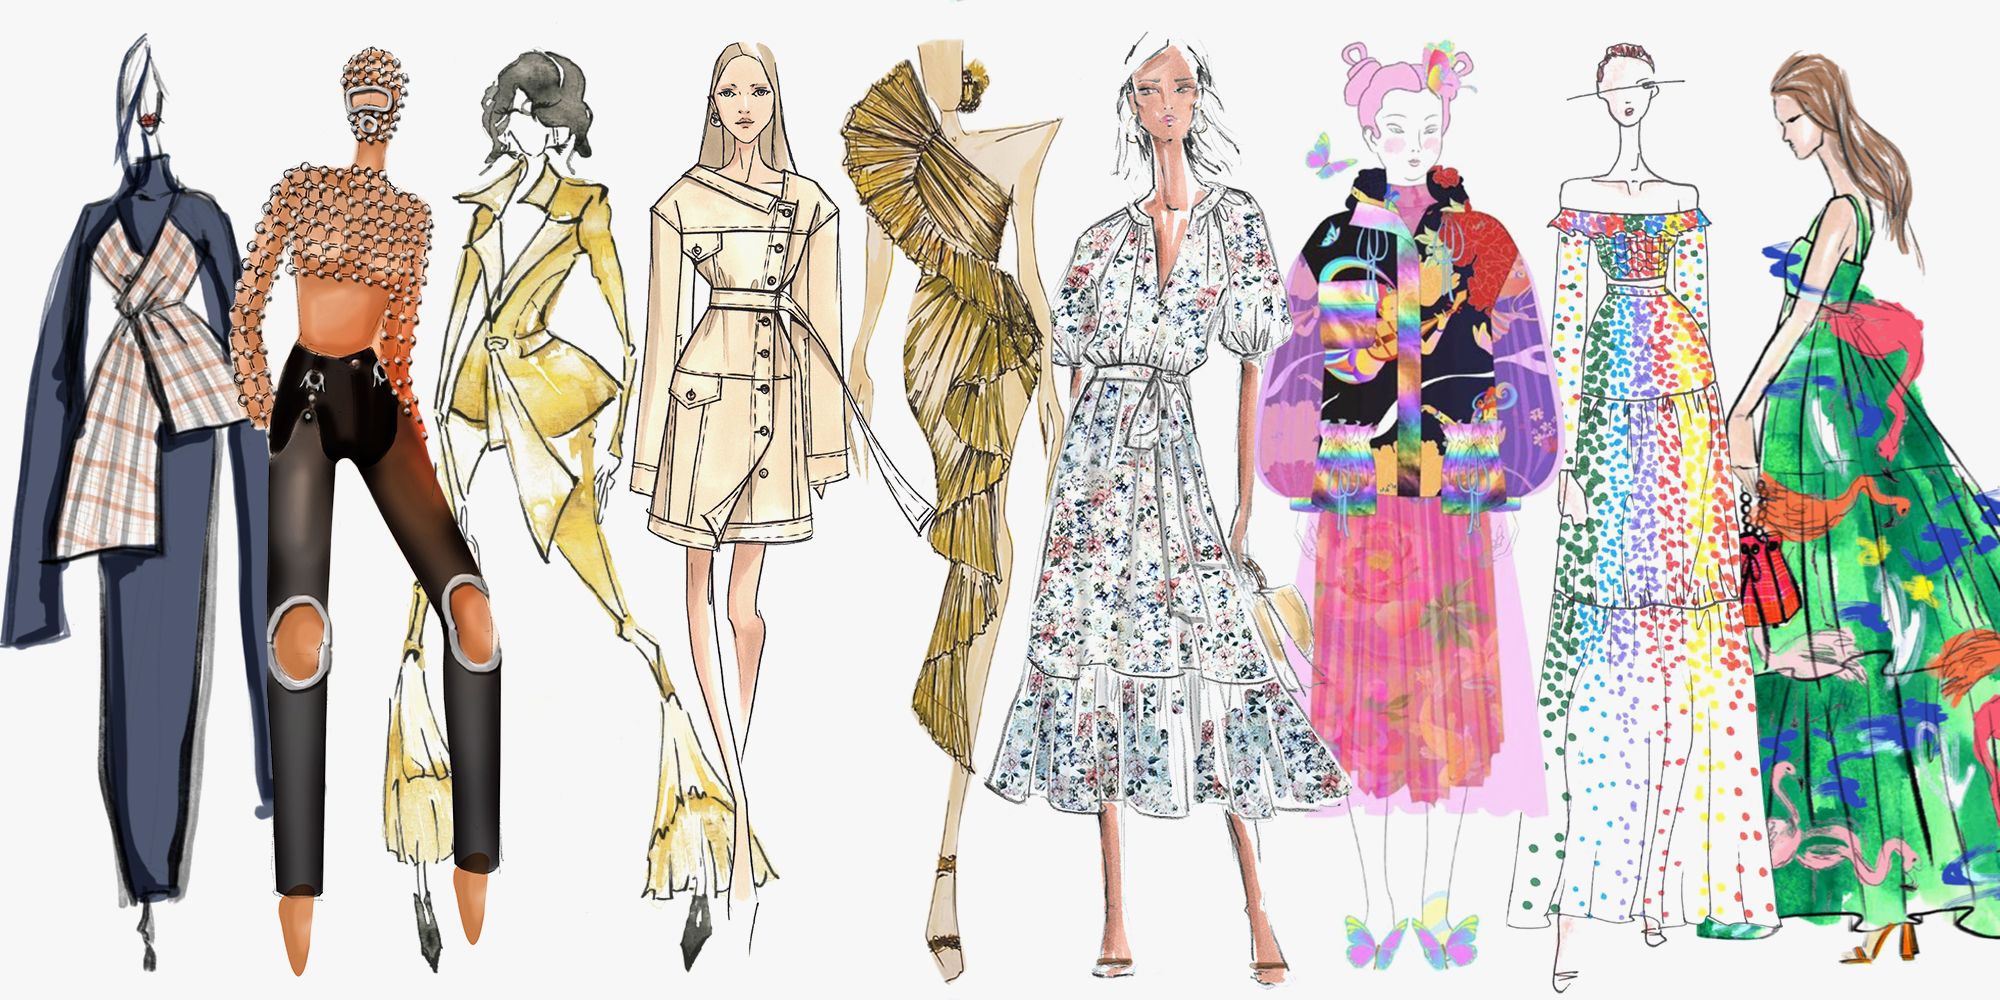 What is Fashion Designers - What do Fashion Designers do?